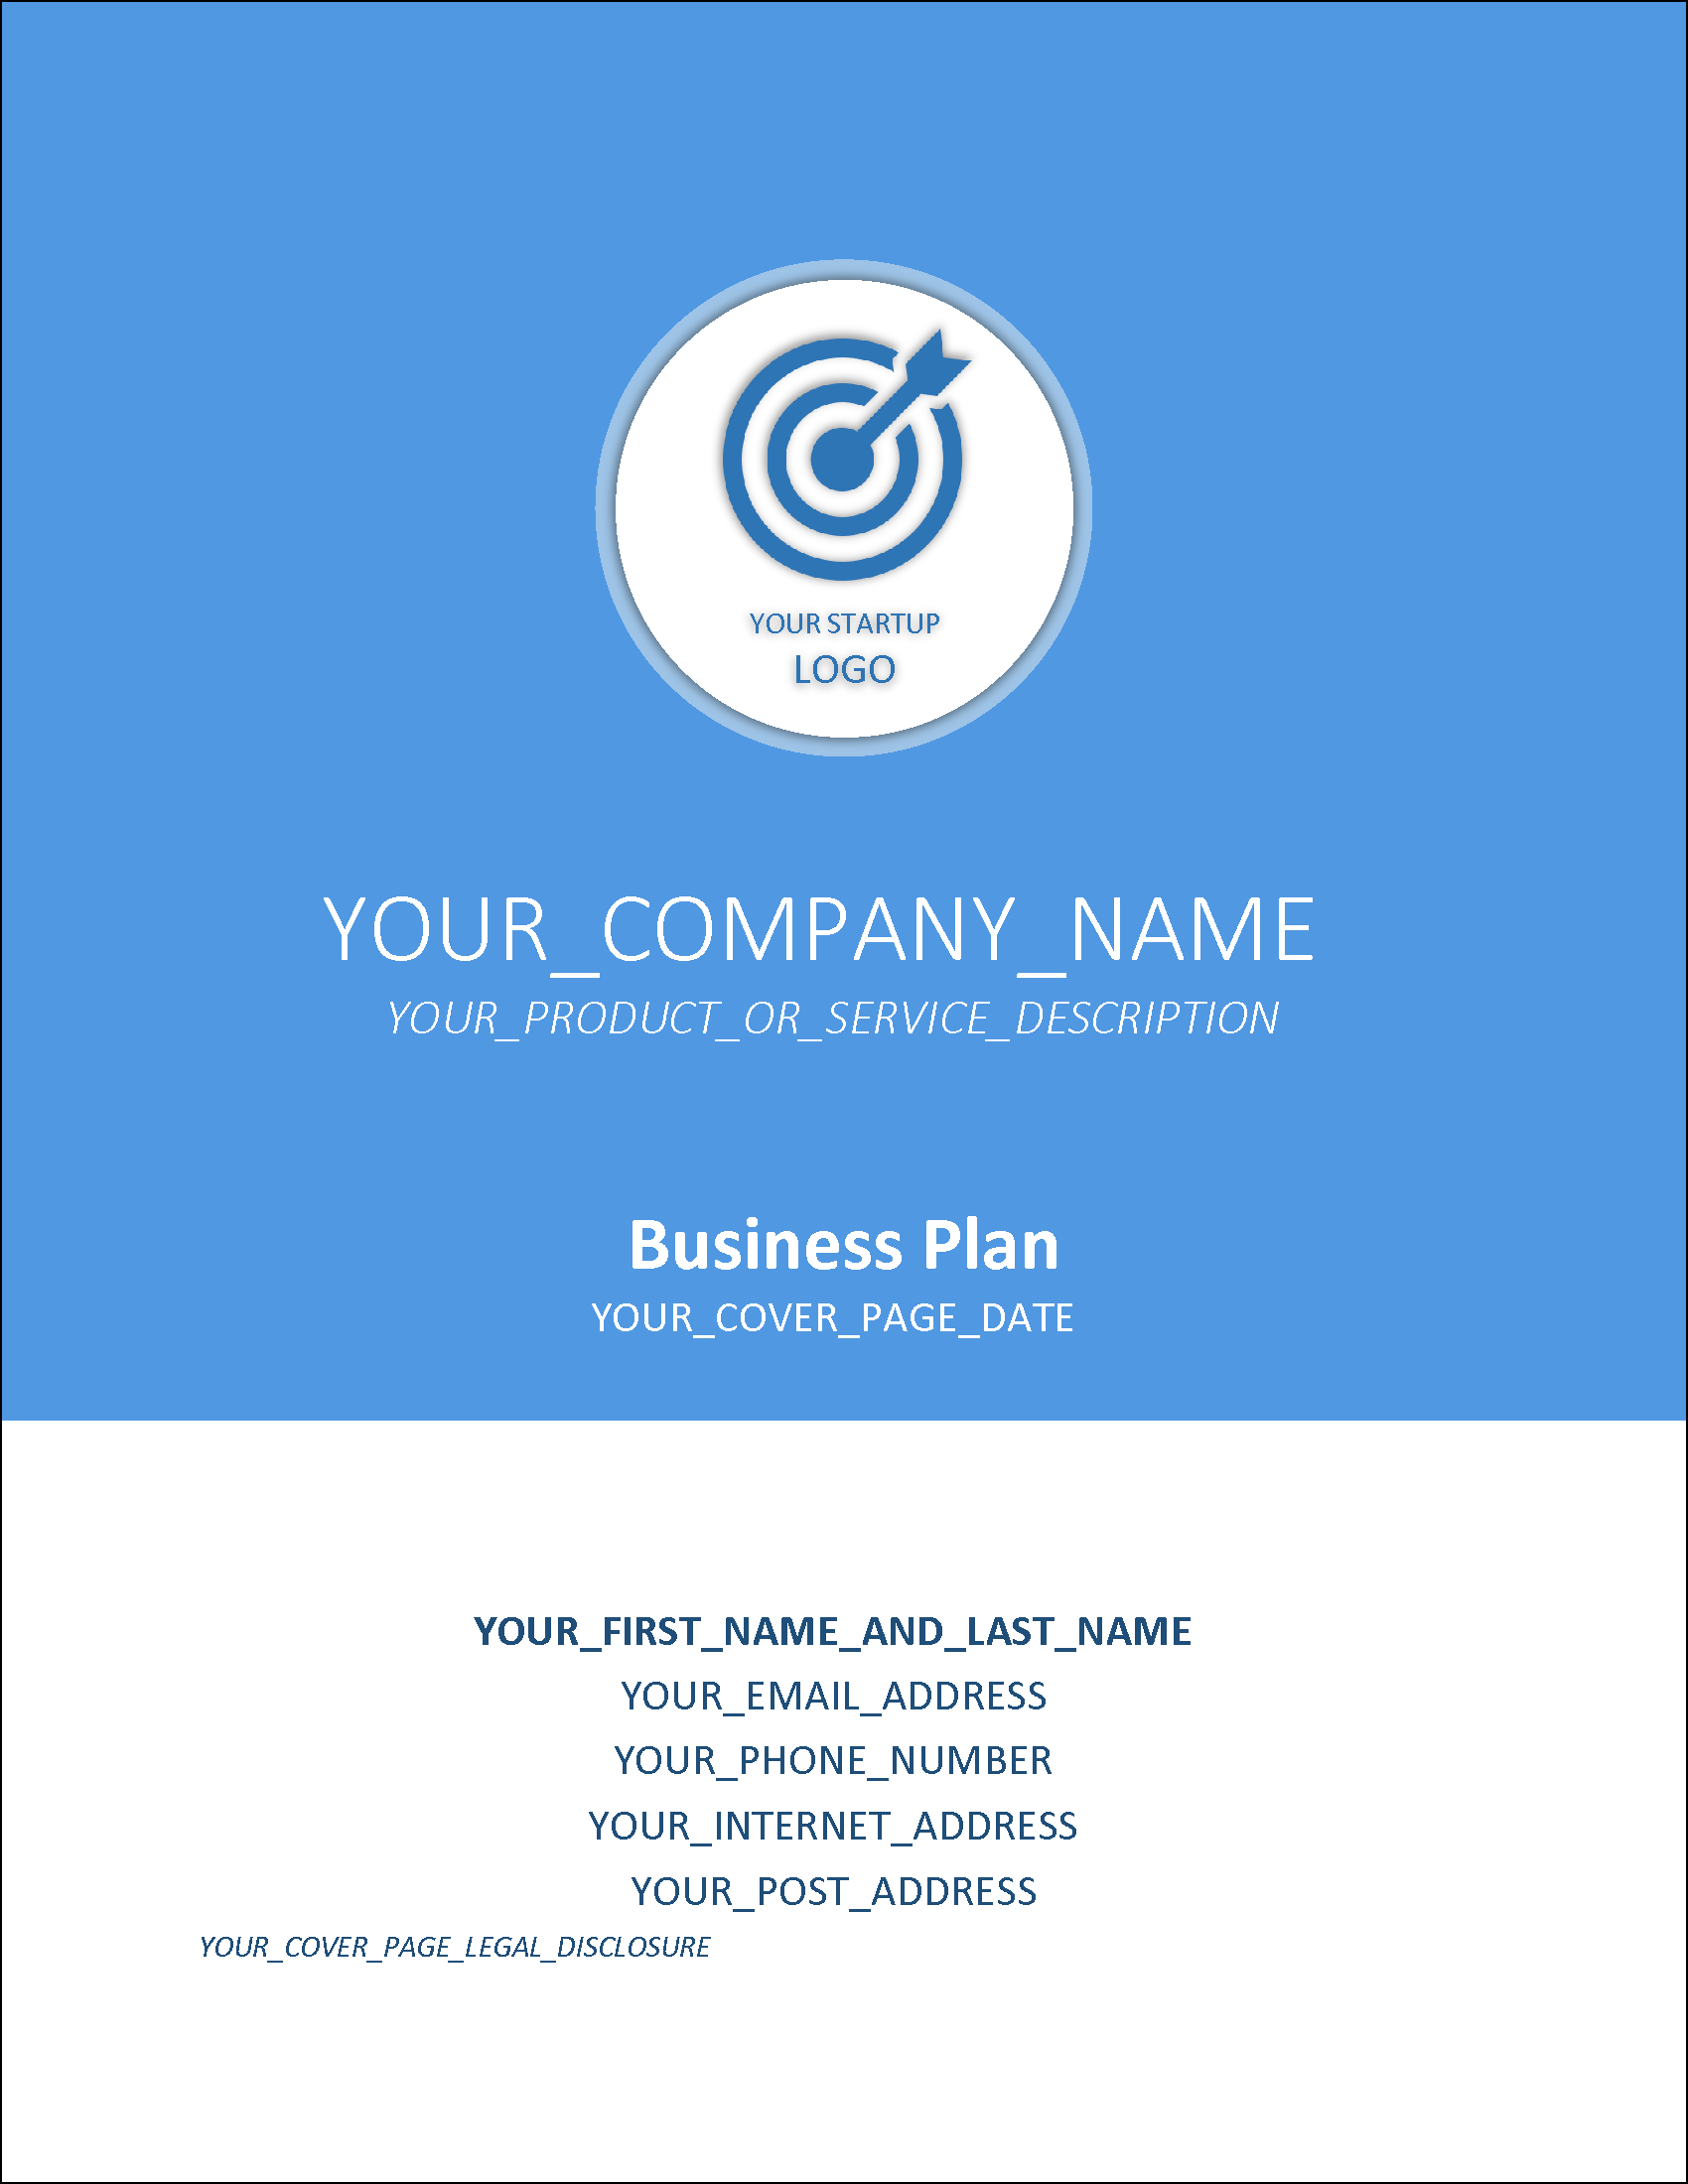 front page of a business plan